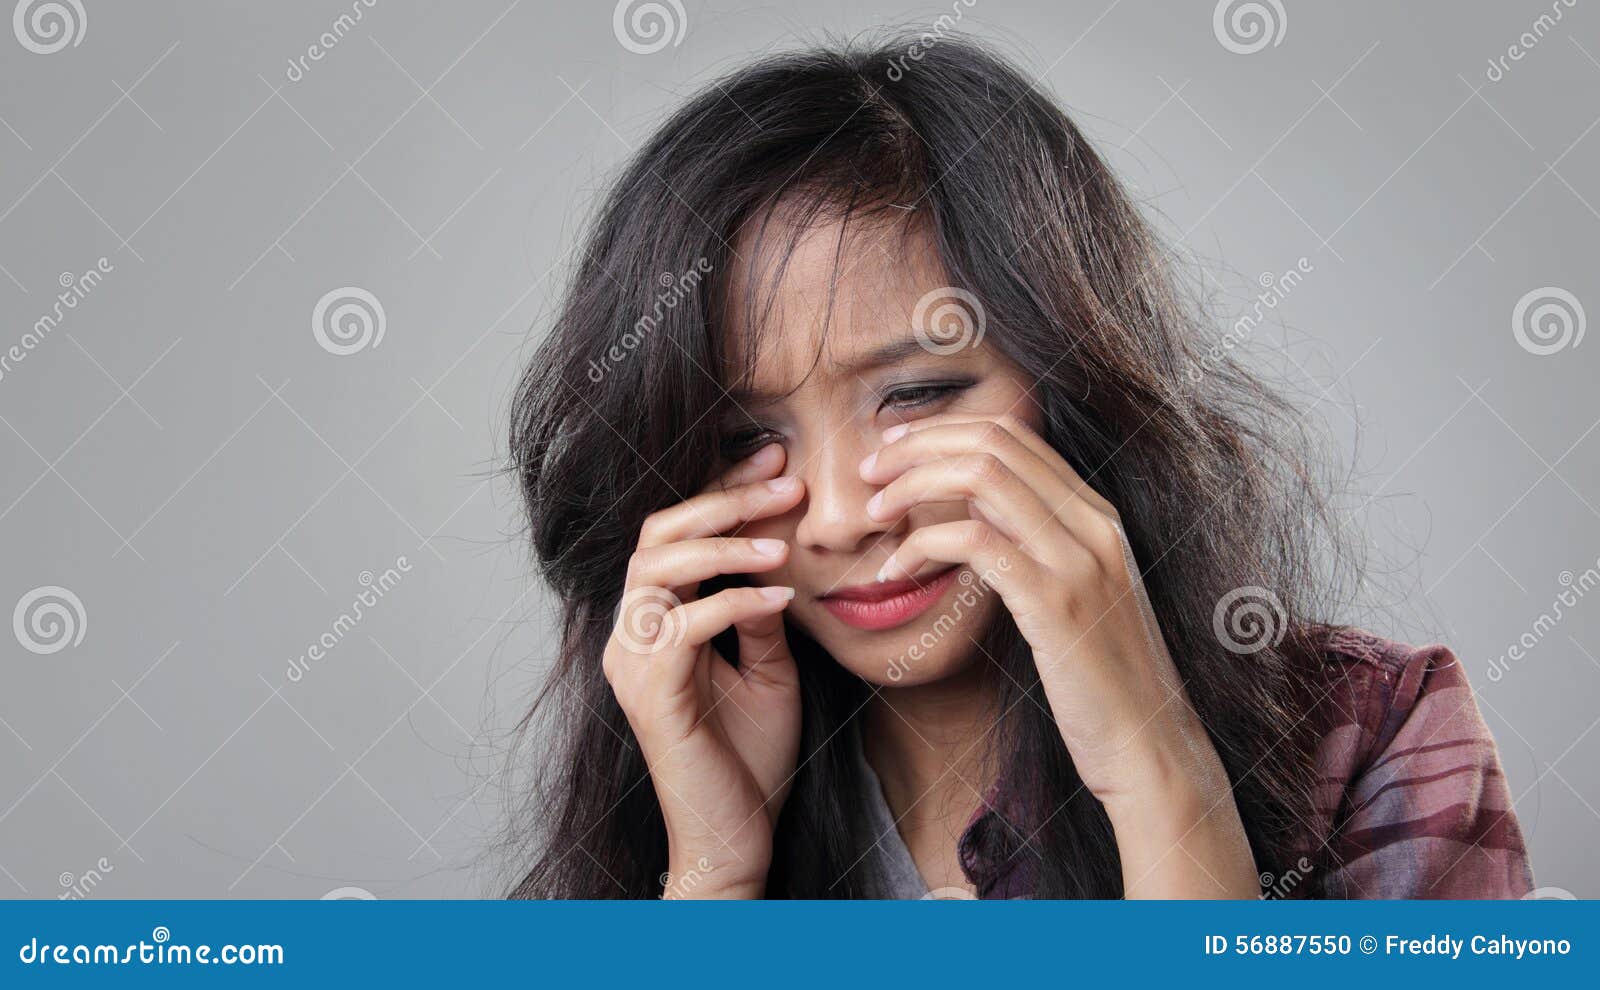 Desperate Teenager Stock Photo Image Of Frustrated Despair 56887550